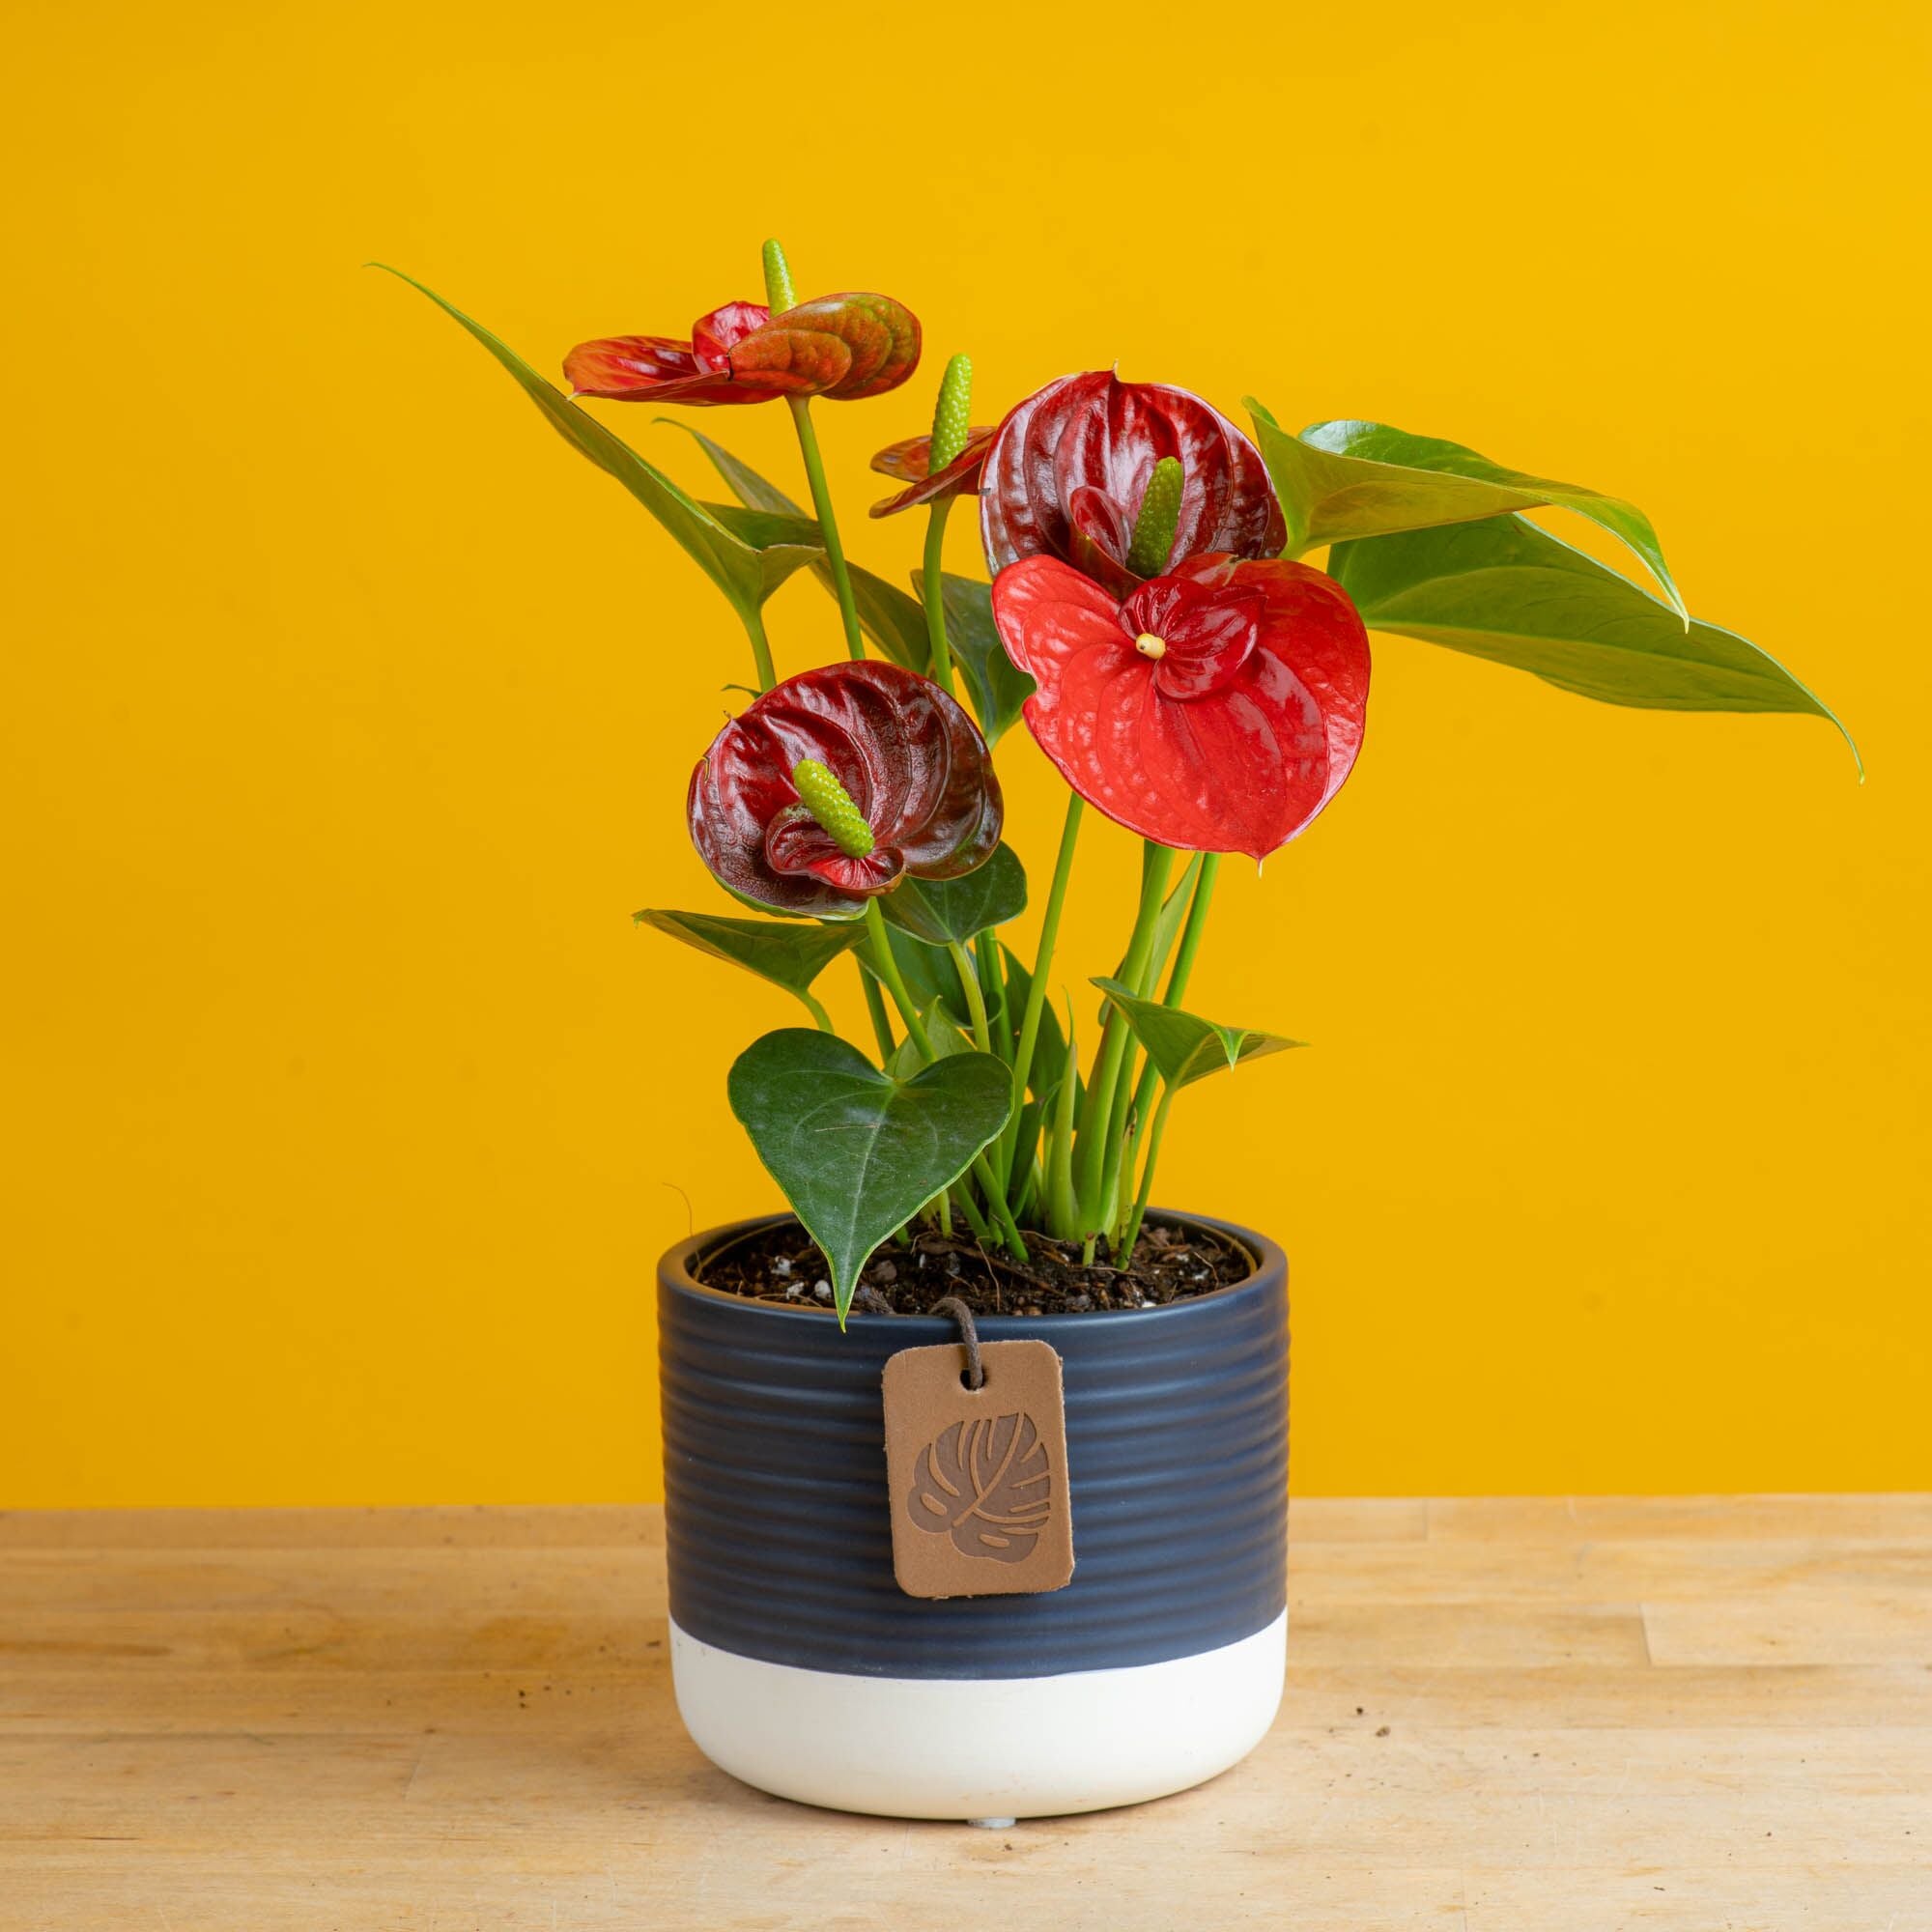 anthurium plant in navy blue pot with 4 blooms on a yellow background